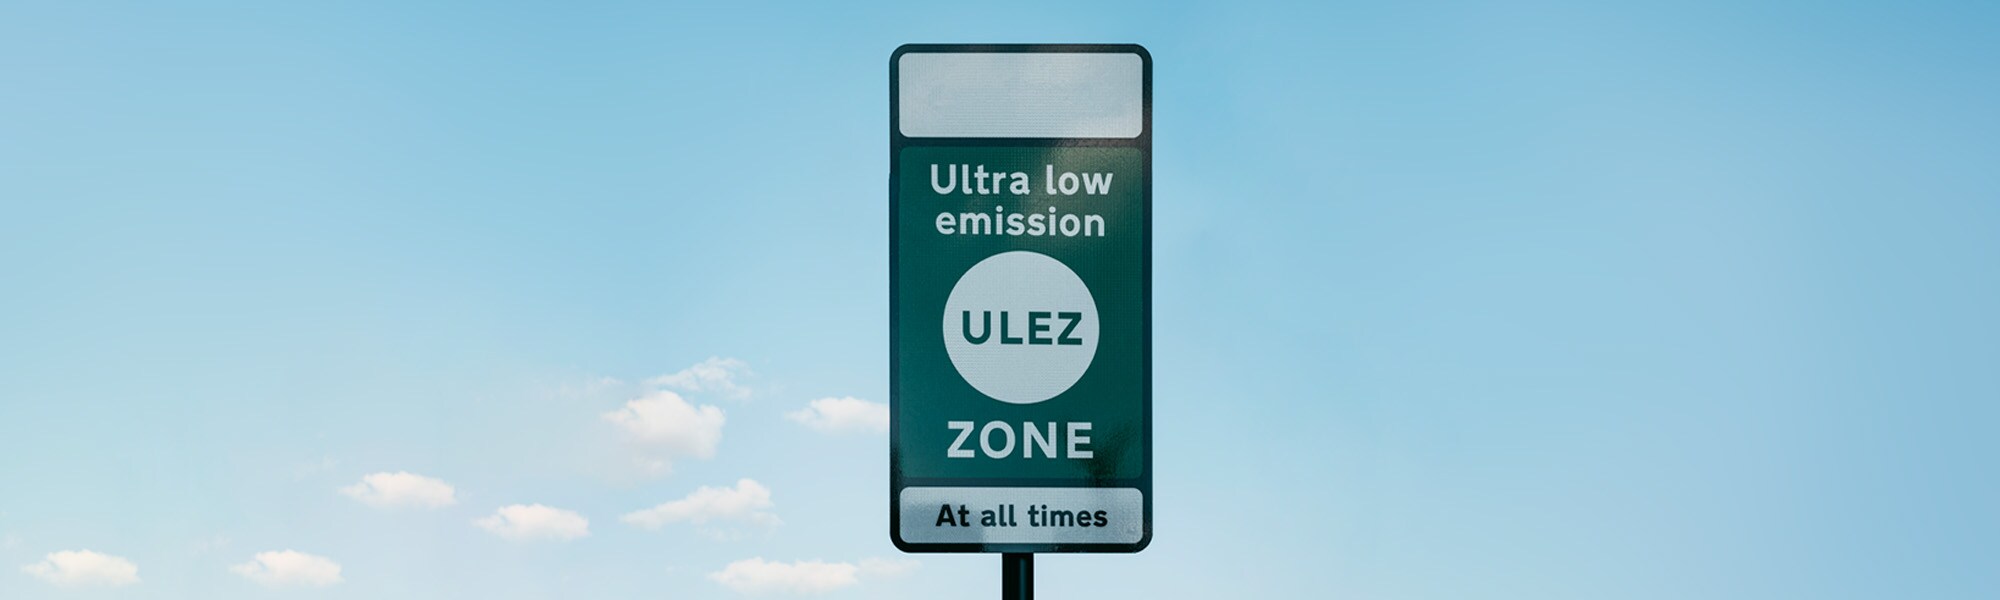 Do low emission zones work? TomTom Traffic Index has the answer